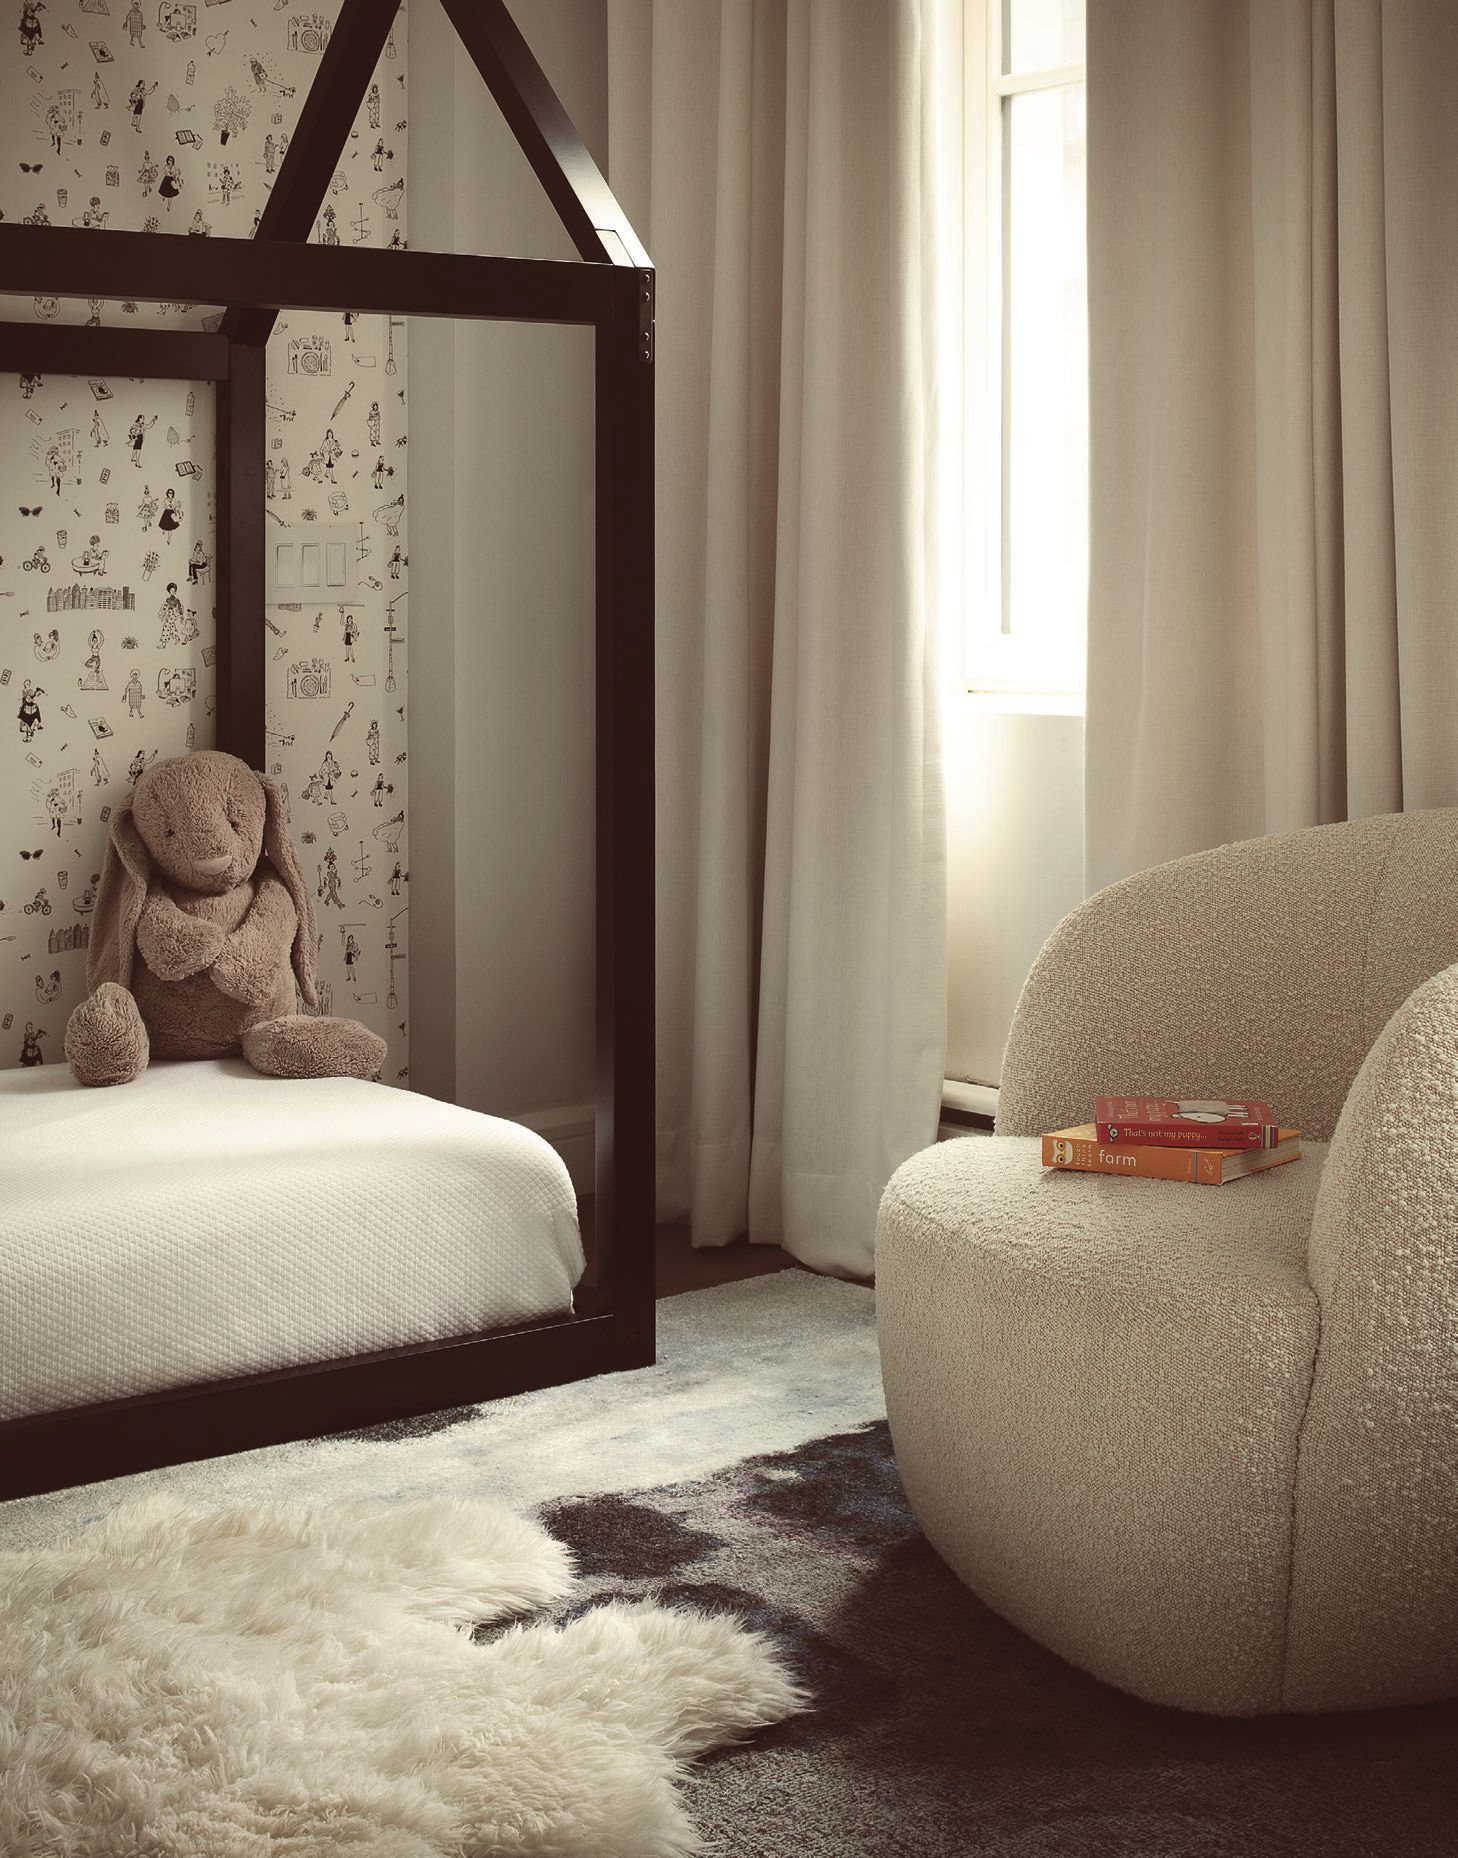 The kids room offers a playful haven for the clients’ two young children, while still carrying the modern aesthetic found throughout the rest of the home. PHOTO COURTESY OF ATRA